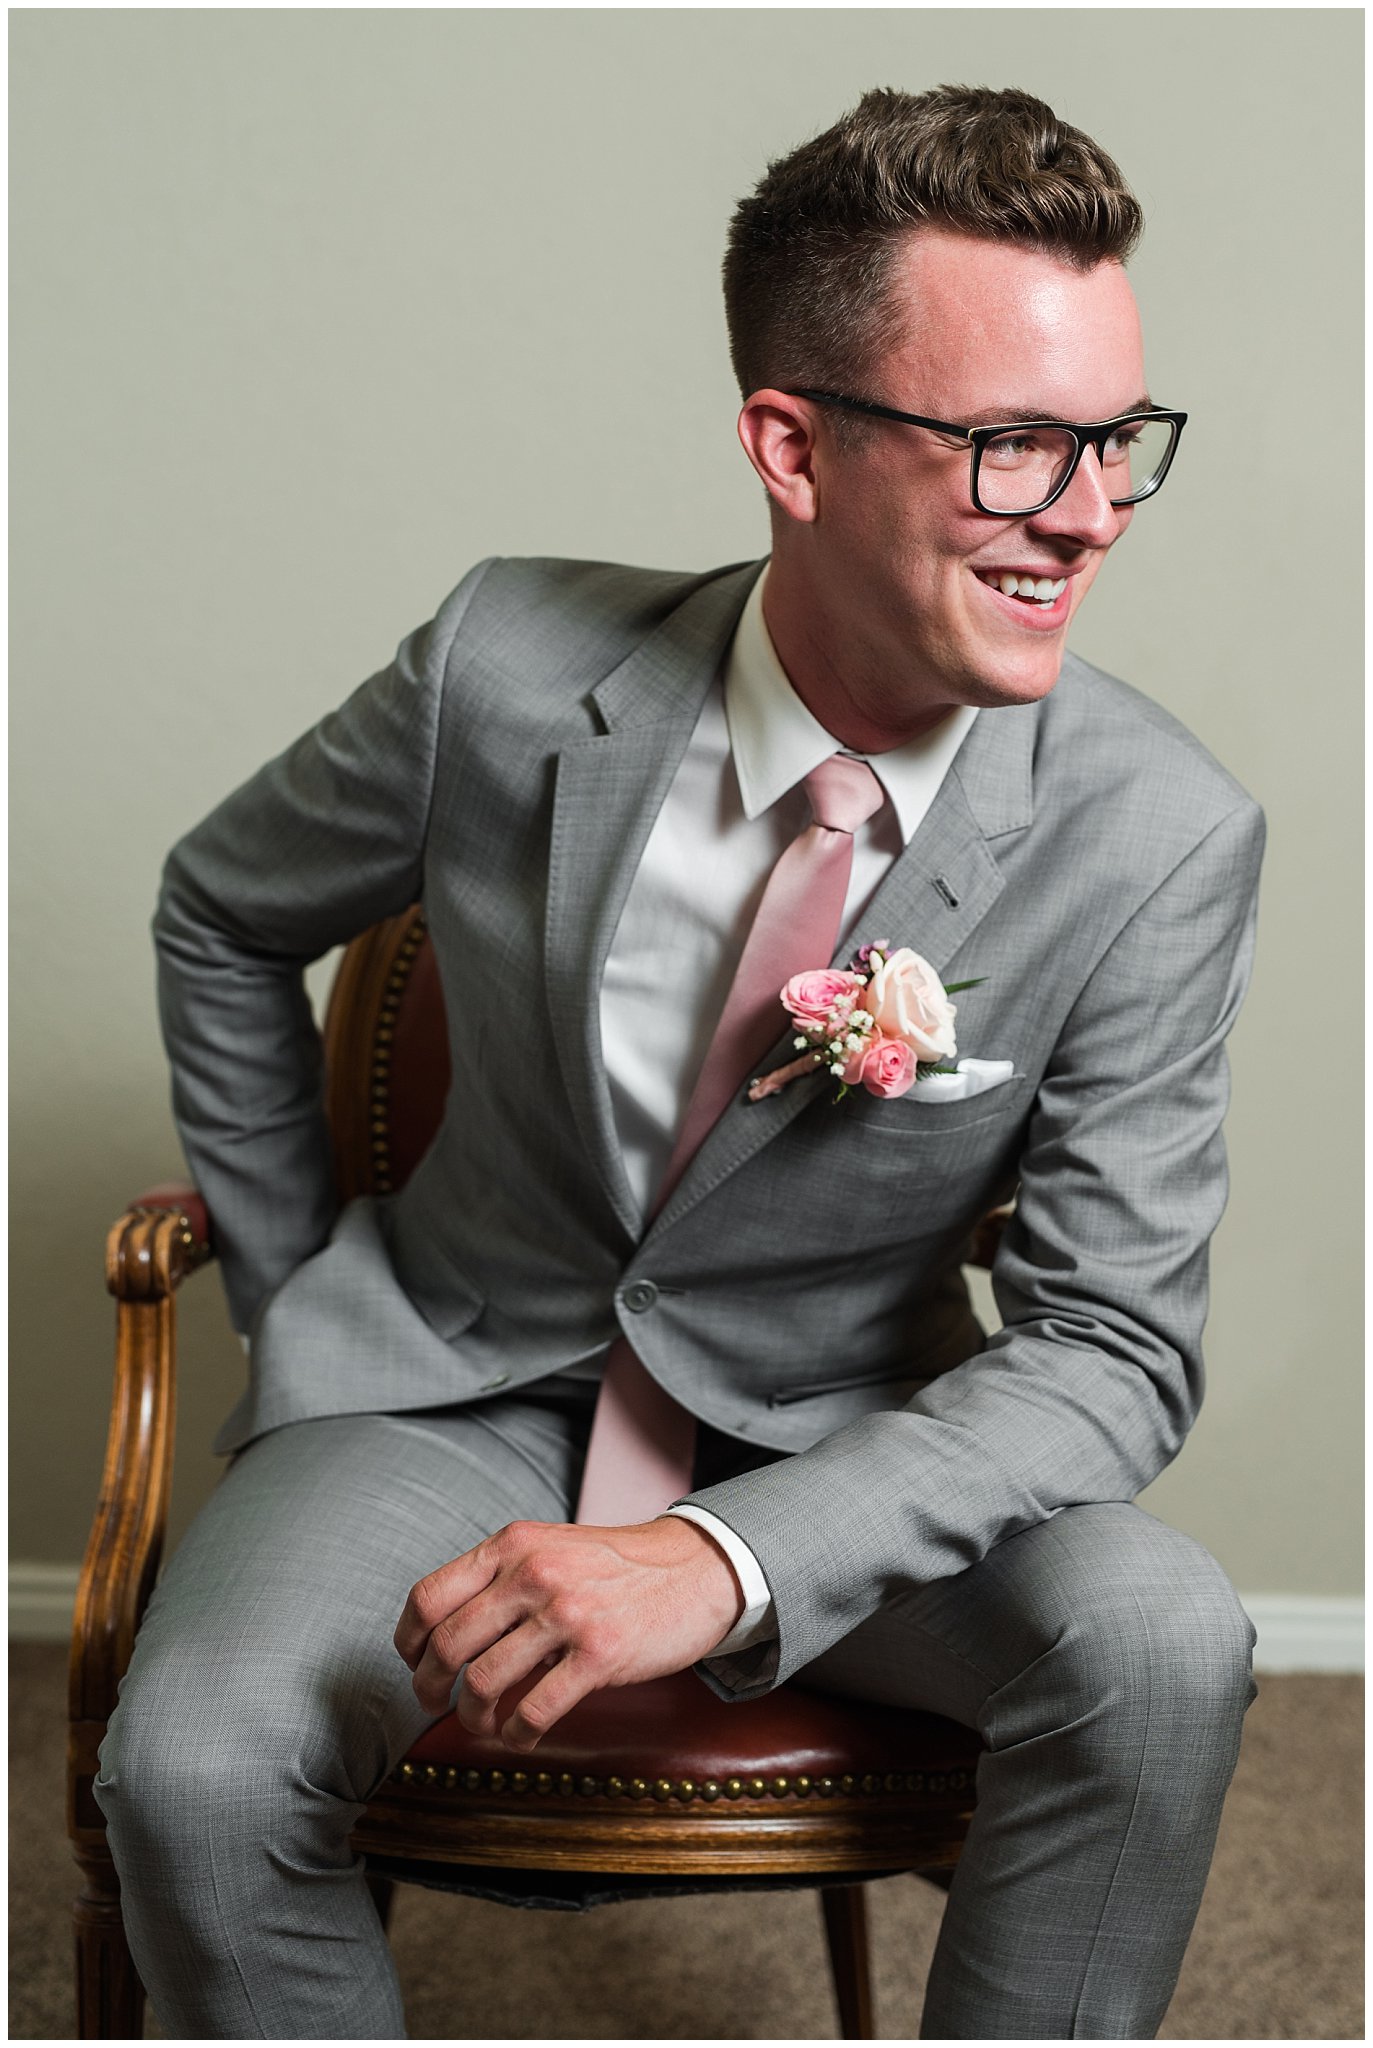 Groom in gray suit and blush tie portrait | Oak Hills Utah Dusty Rose and Gray Summer Wedding | Jessie and Dallin Photography